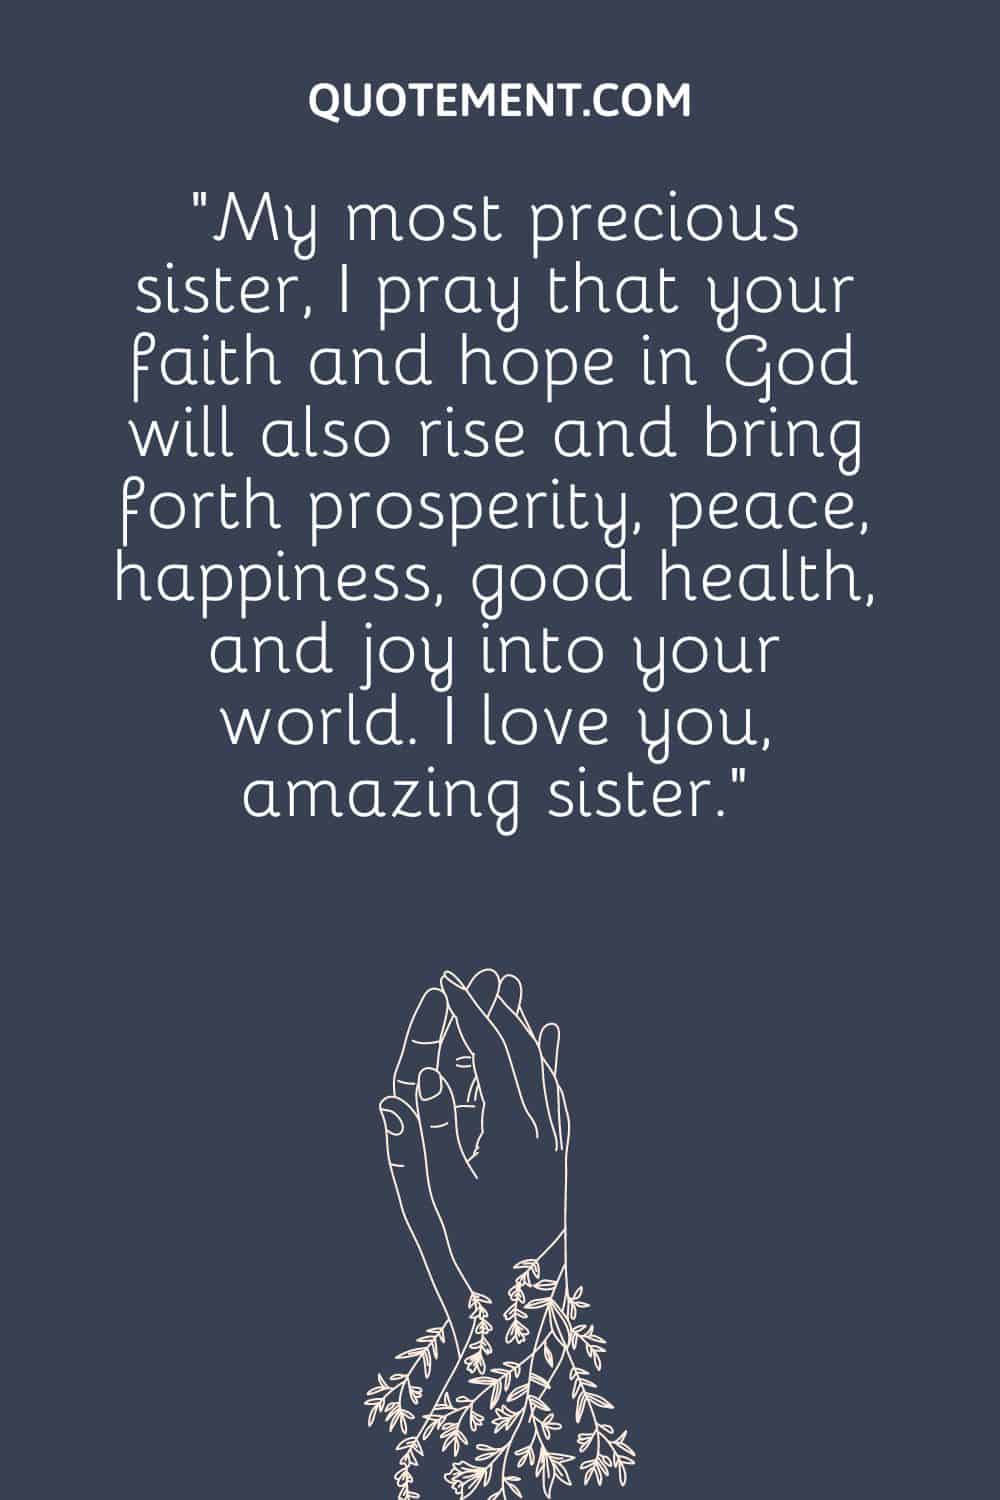 “My most precious sister, I pray that your faith and hope in God will also rise and bring forth prosperity, peace, happiness, good health, and joy into your world. I love you, amazing sister.”